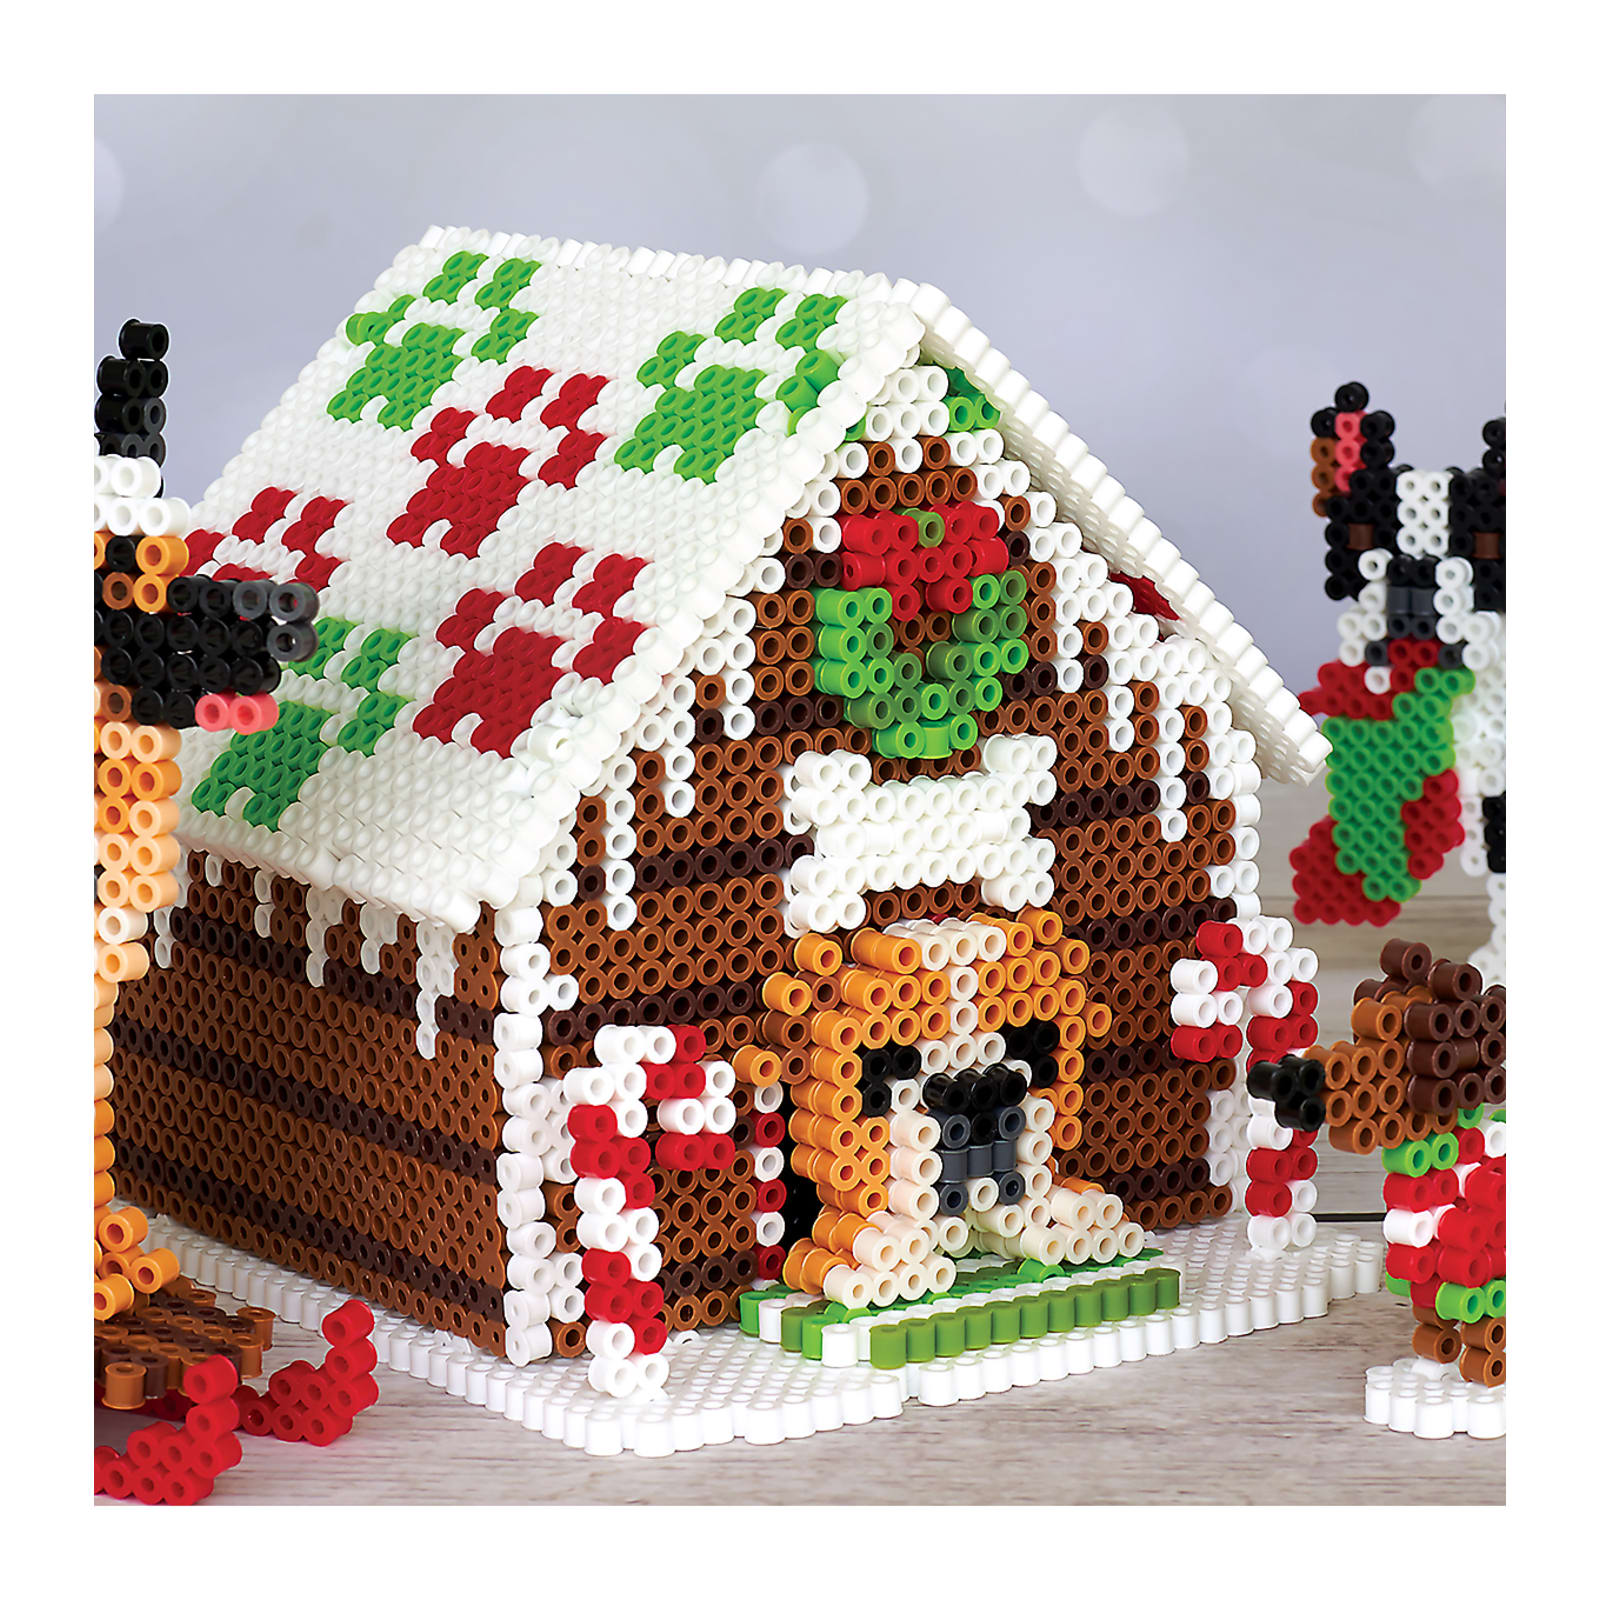  Perler Gingerbread House Christmas Fused Bead Kit for Kids'  Crafts, Multicolor 10006 Piece, Small : Arts, Crafts & Sewing